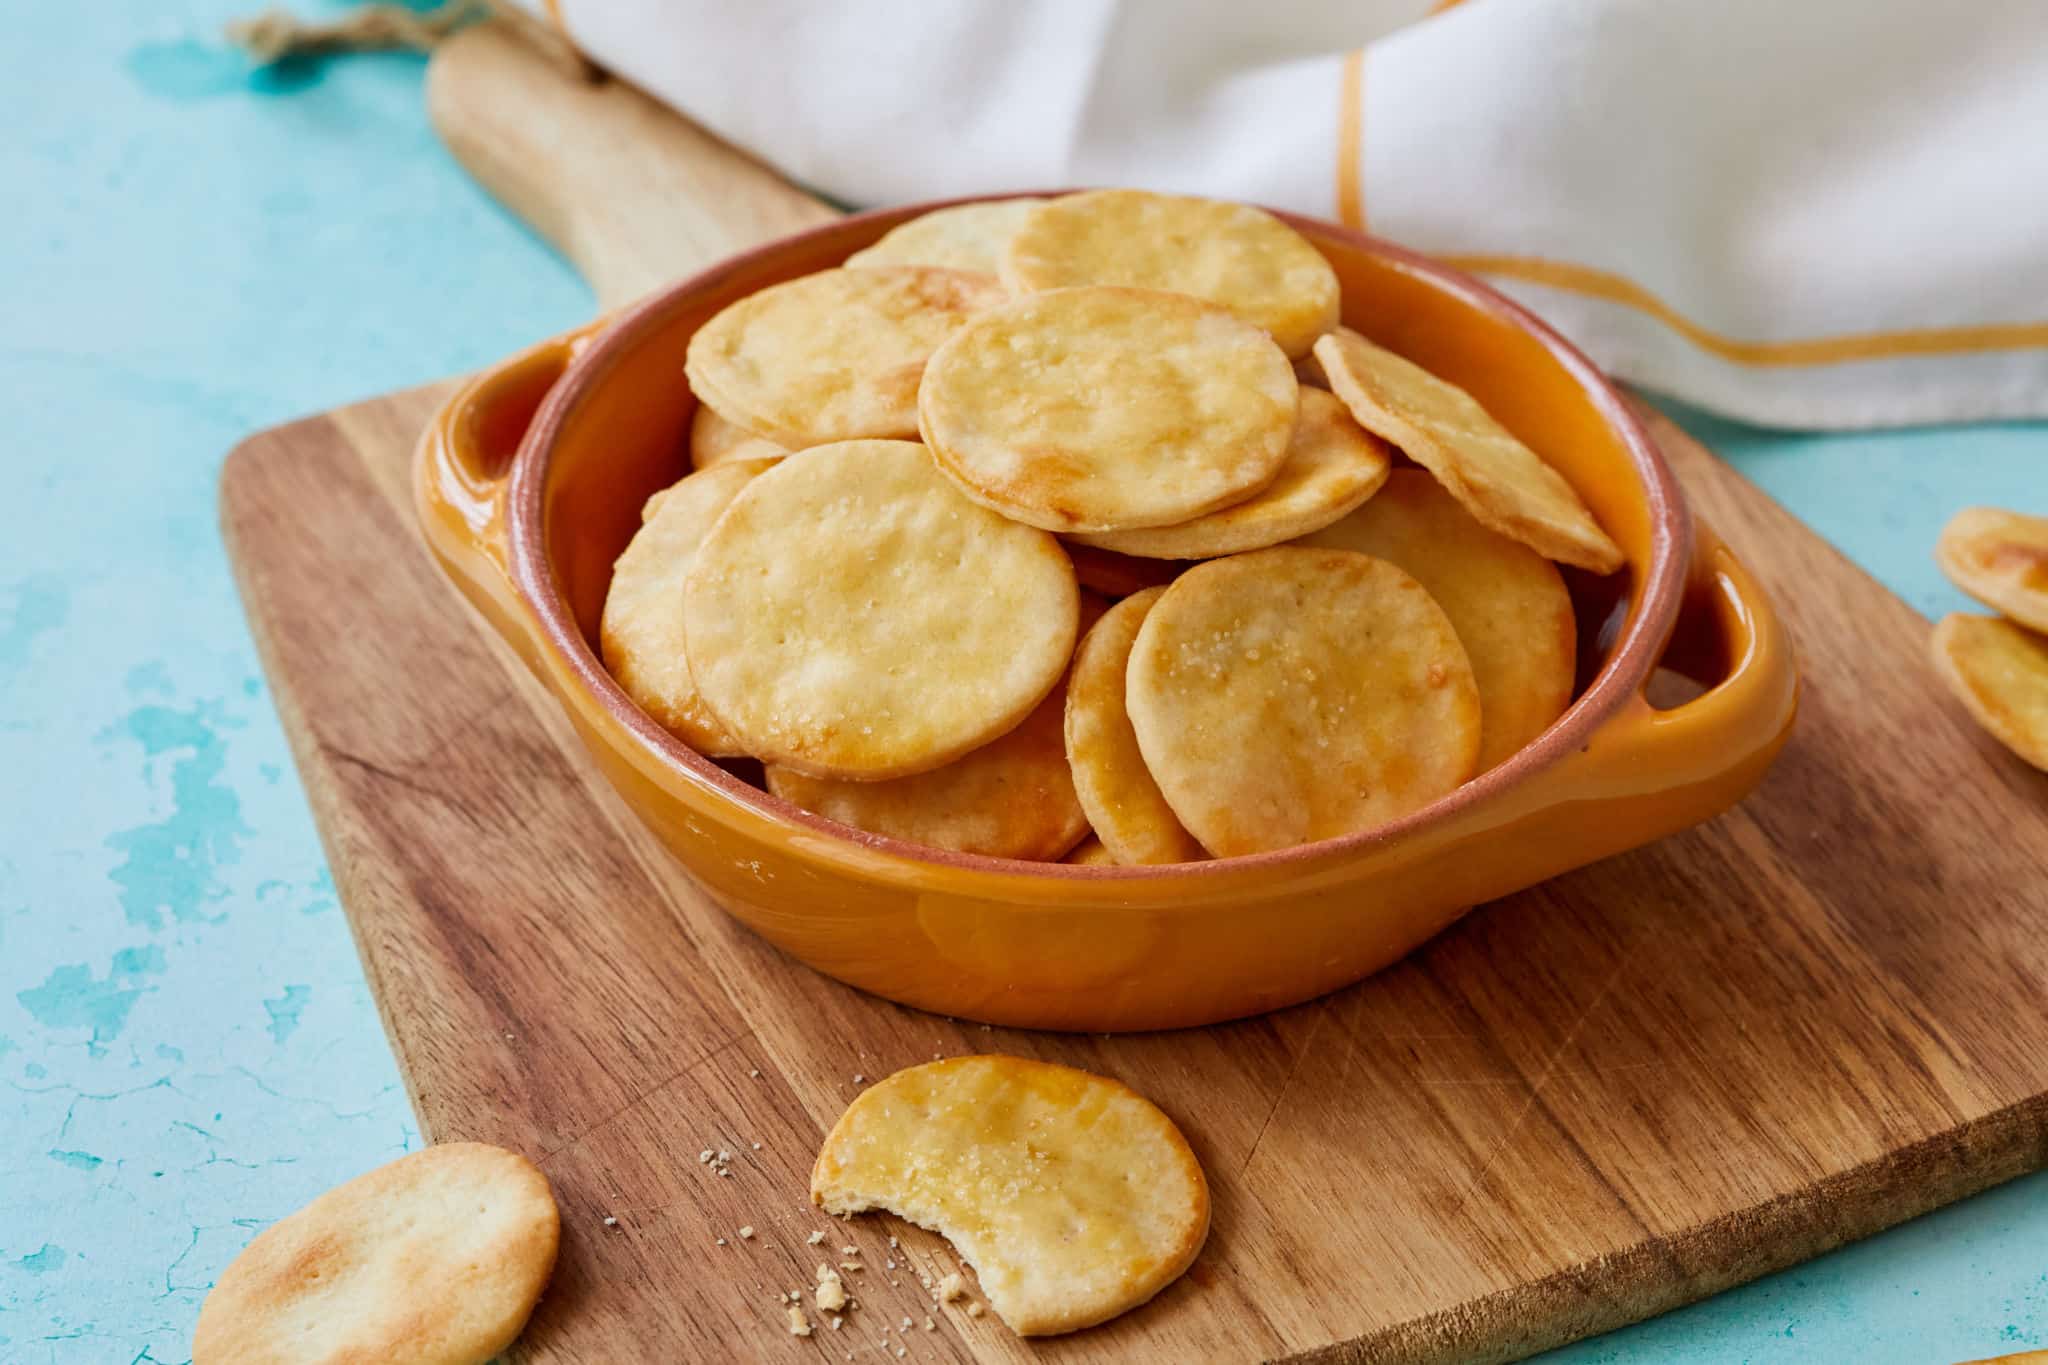 A bowl of homemade Ritz Crackers sit on a wood cutting board. They look crispy.